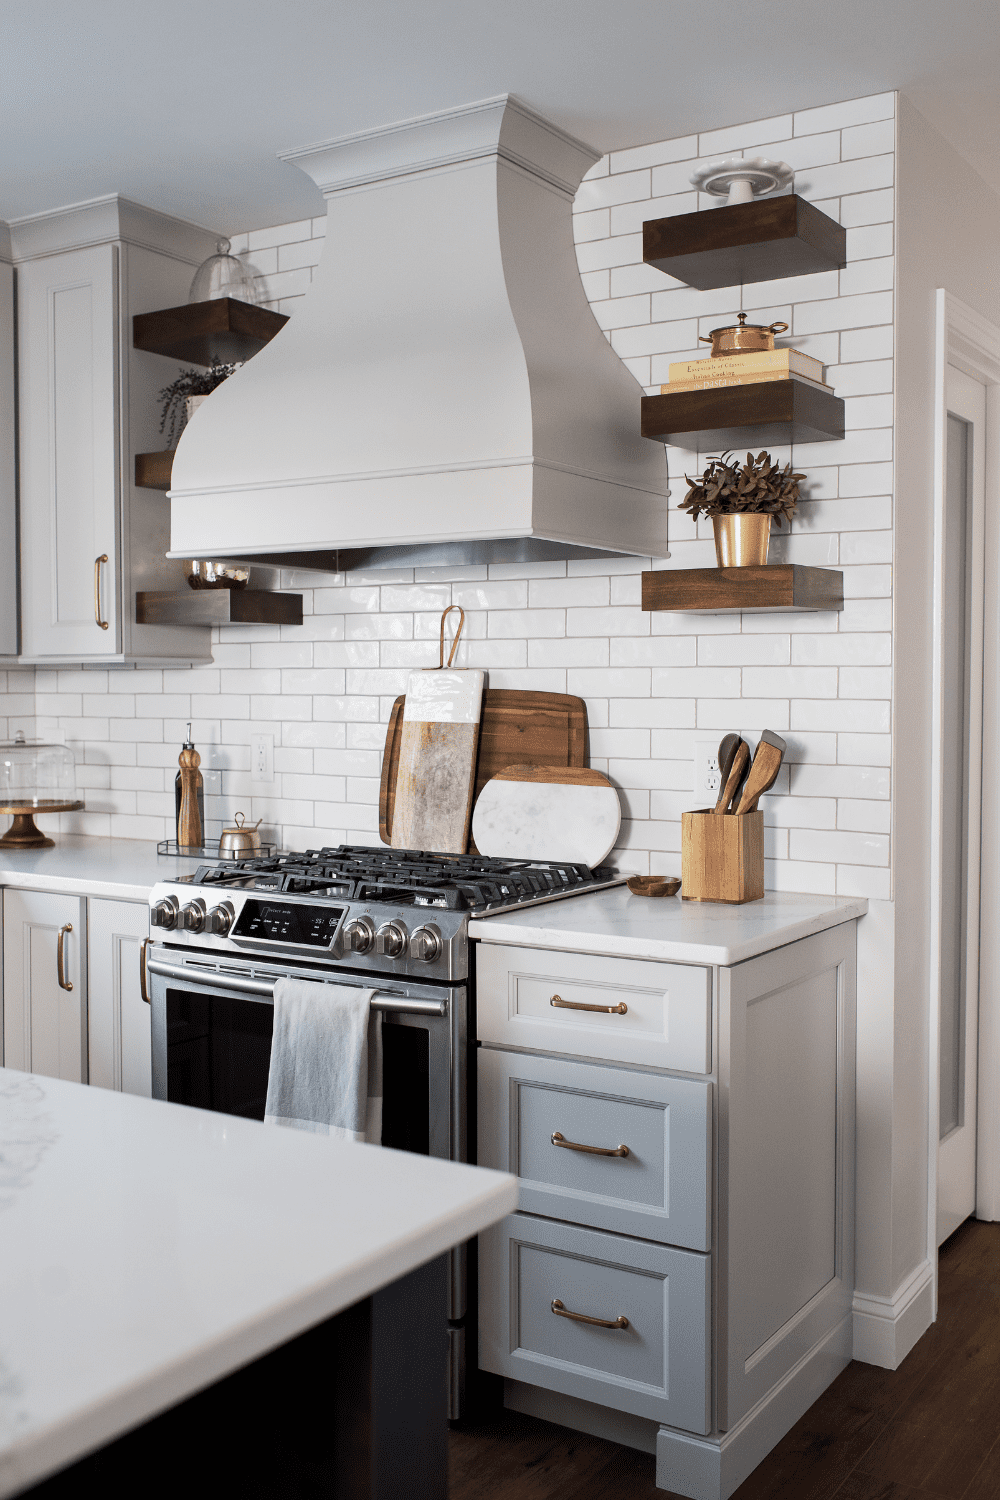 Nicholas Design Build | A neutral kitchen with a stove and oven.